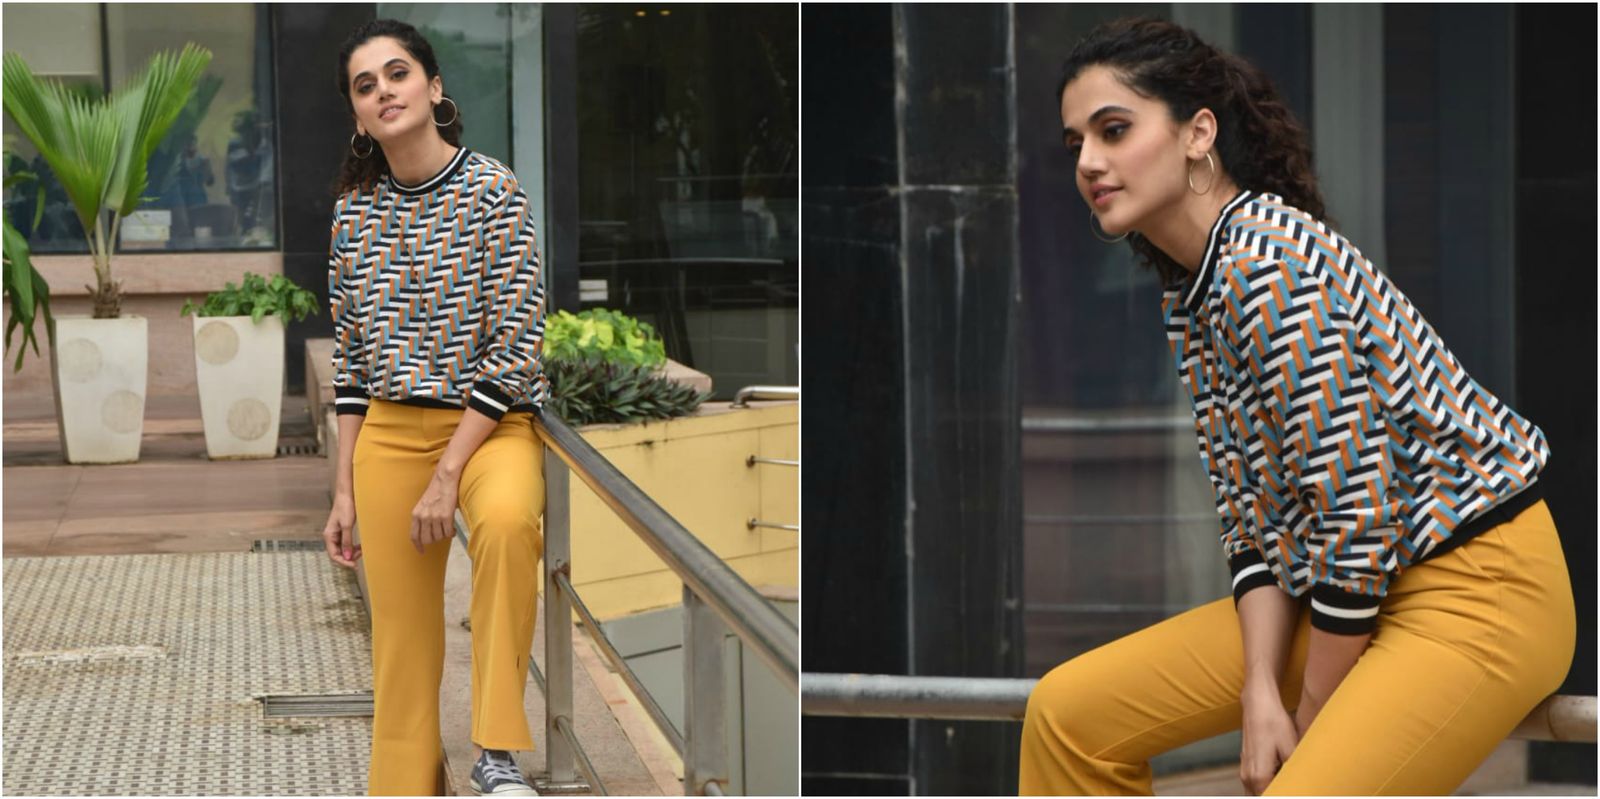 Taapsee Pannu Decides To Give Subtle Retro-Chic Vibes And So Should You, Of Course On A Budget